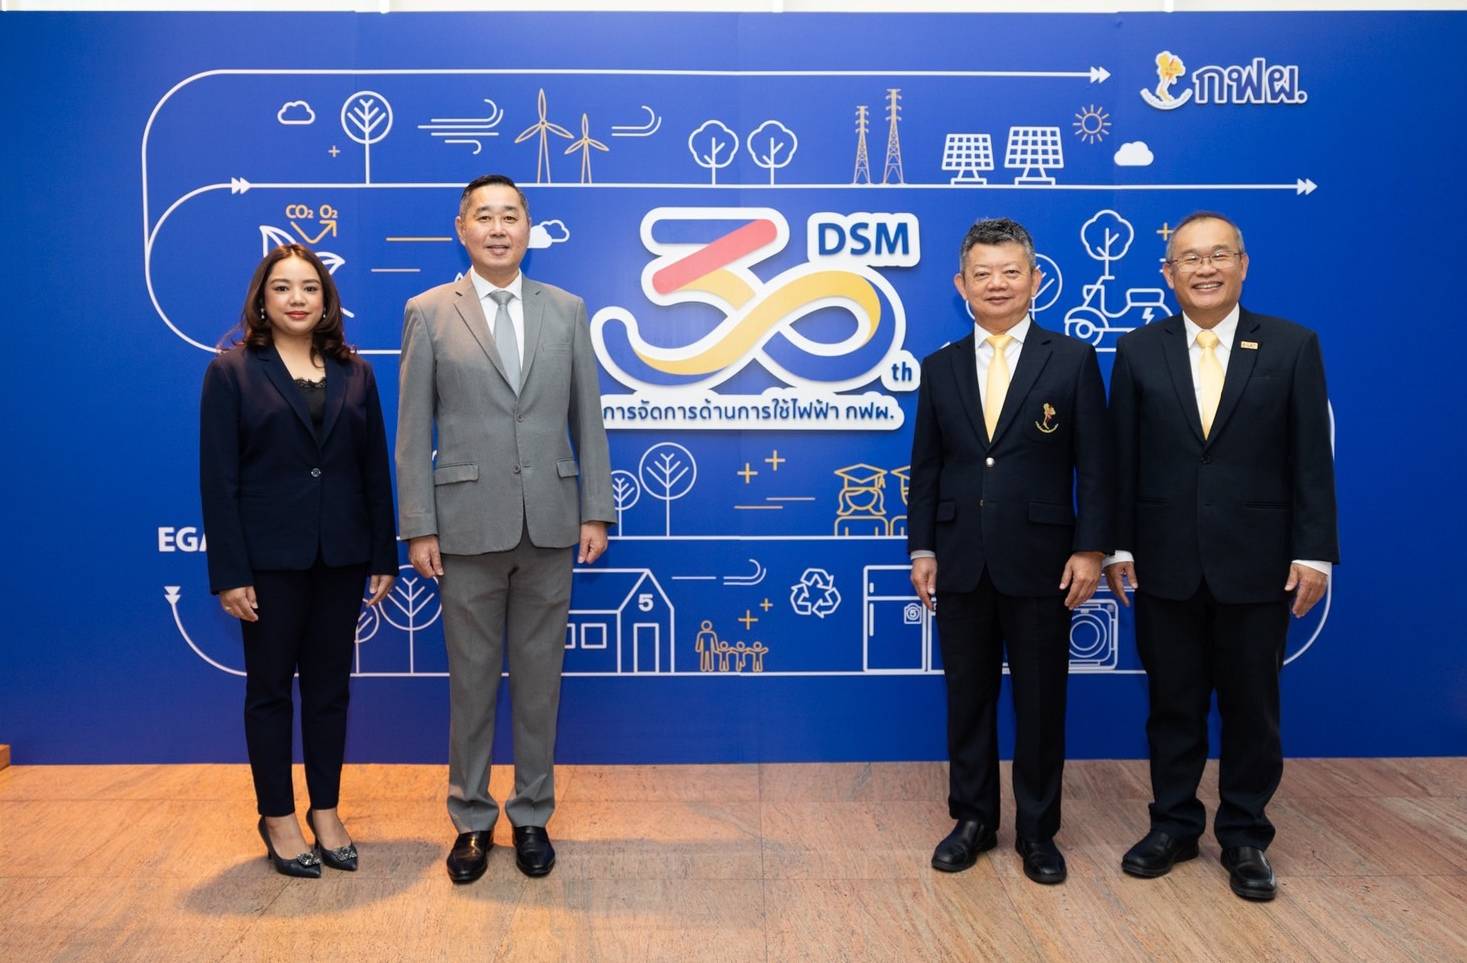 EGAT to celebrate 30th year of DSM and launch new No.5 energy-saving label, moving toward Carbon Neutrality